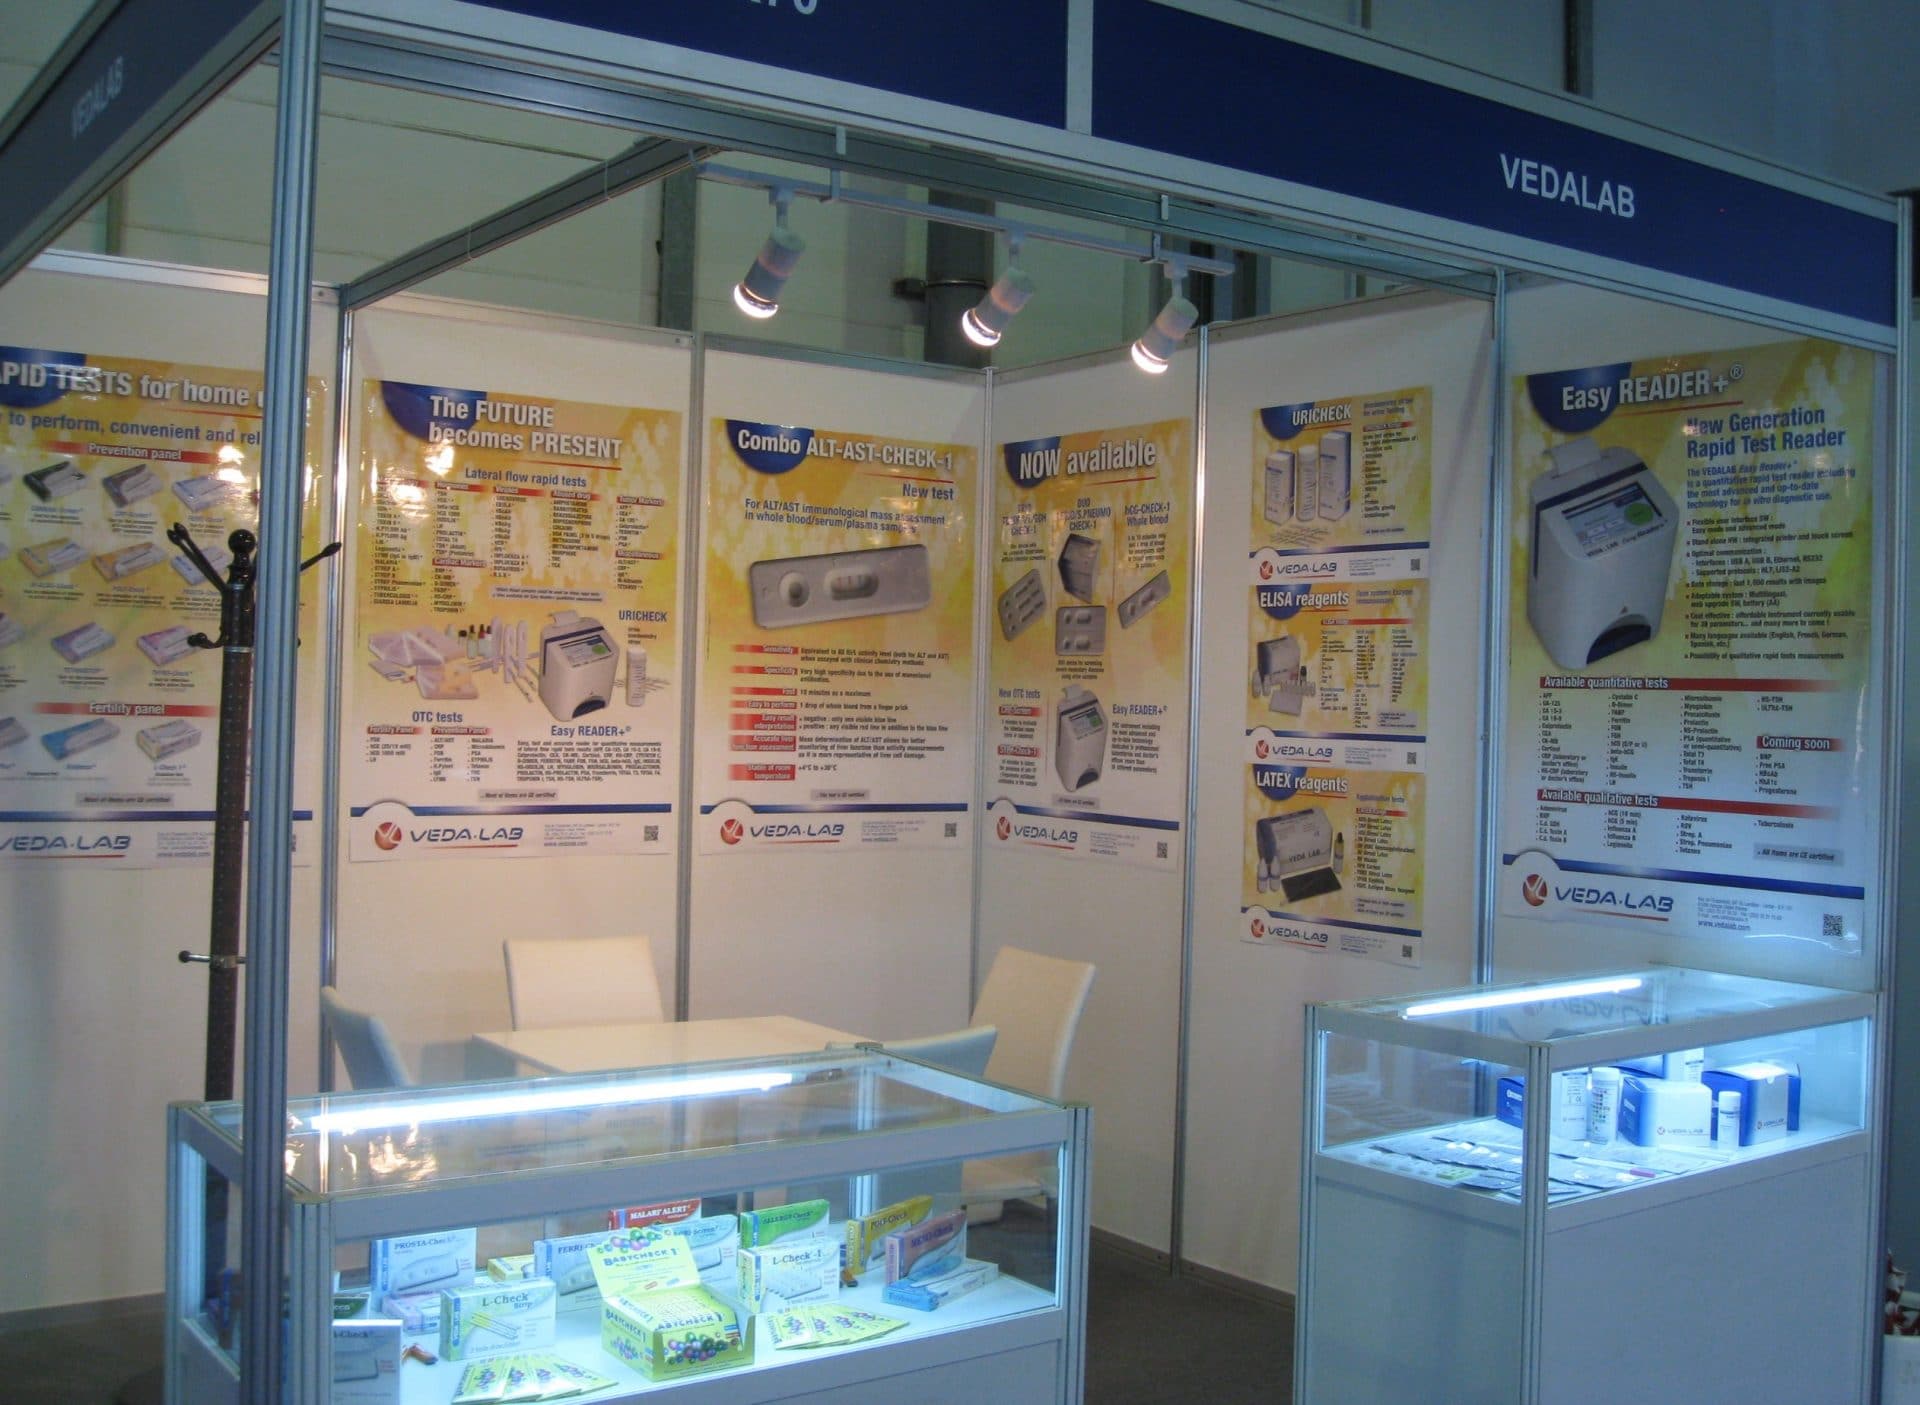 MEDLAB MIDDLE EAST EXHIBITION